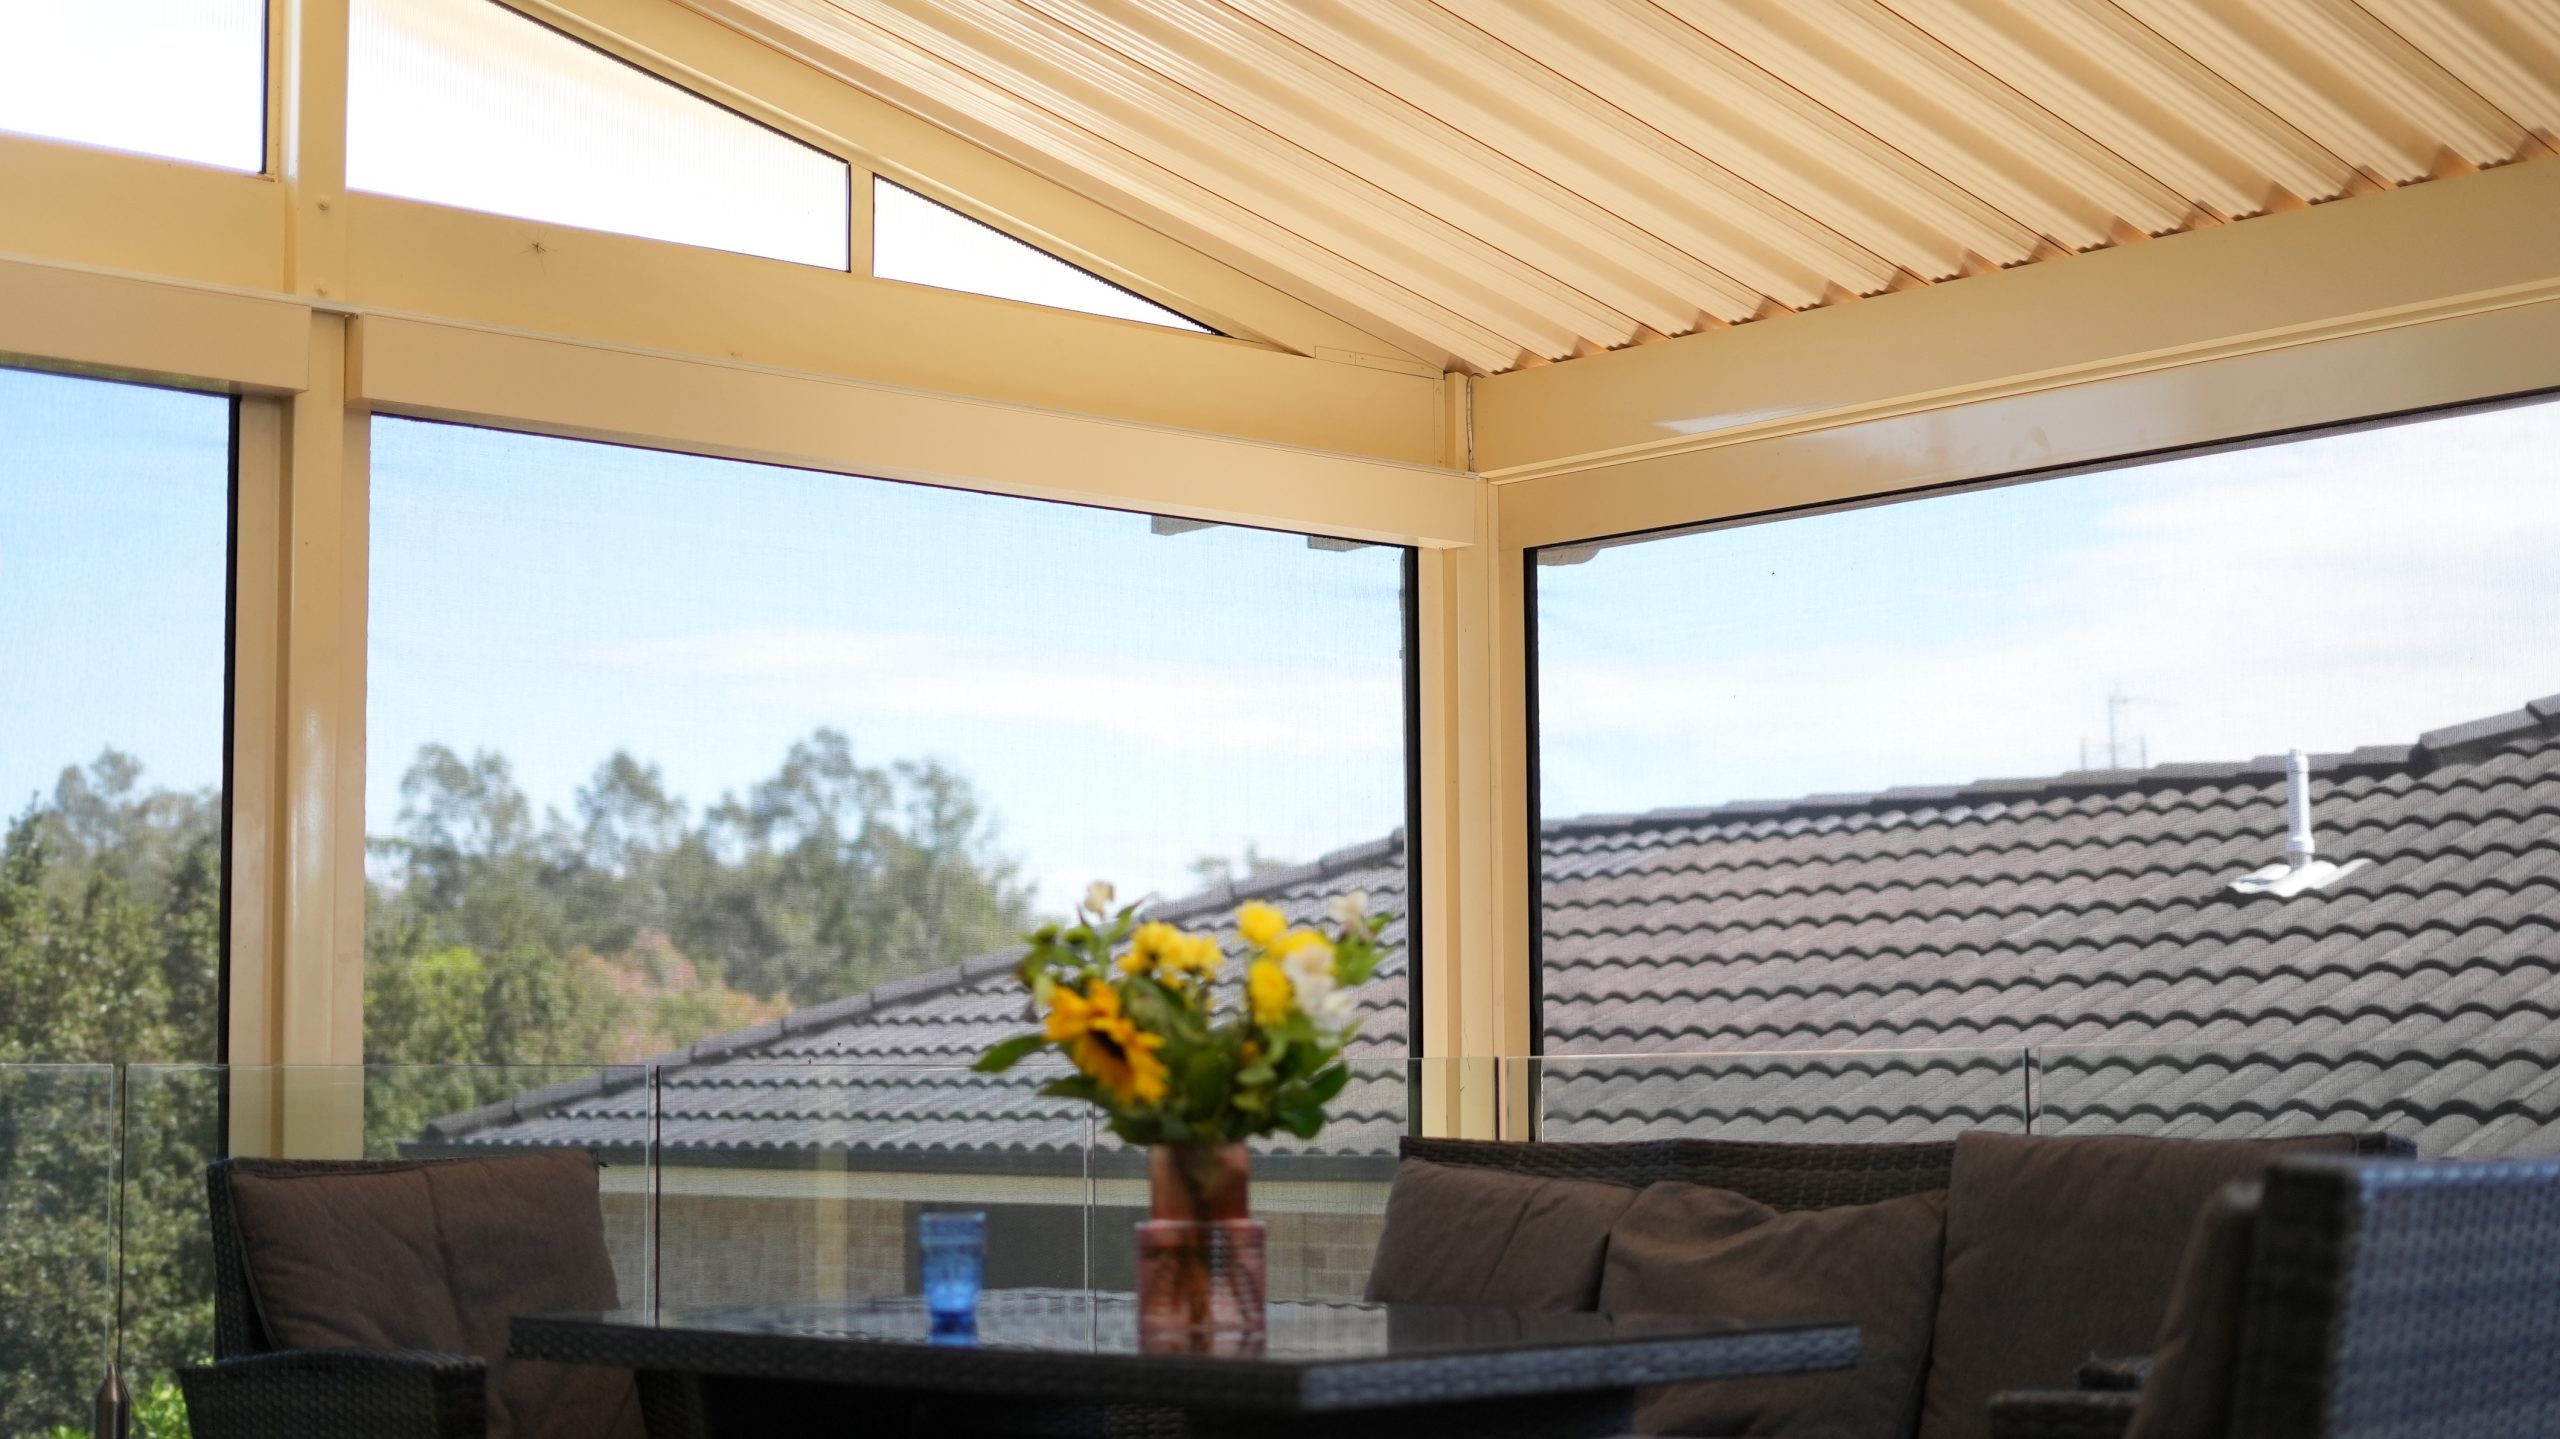 A light filled sunroom with patio roof panels